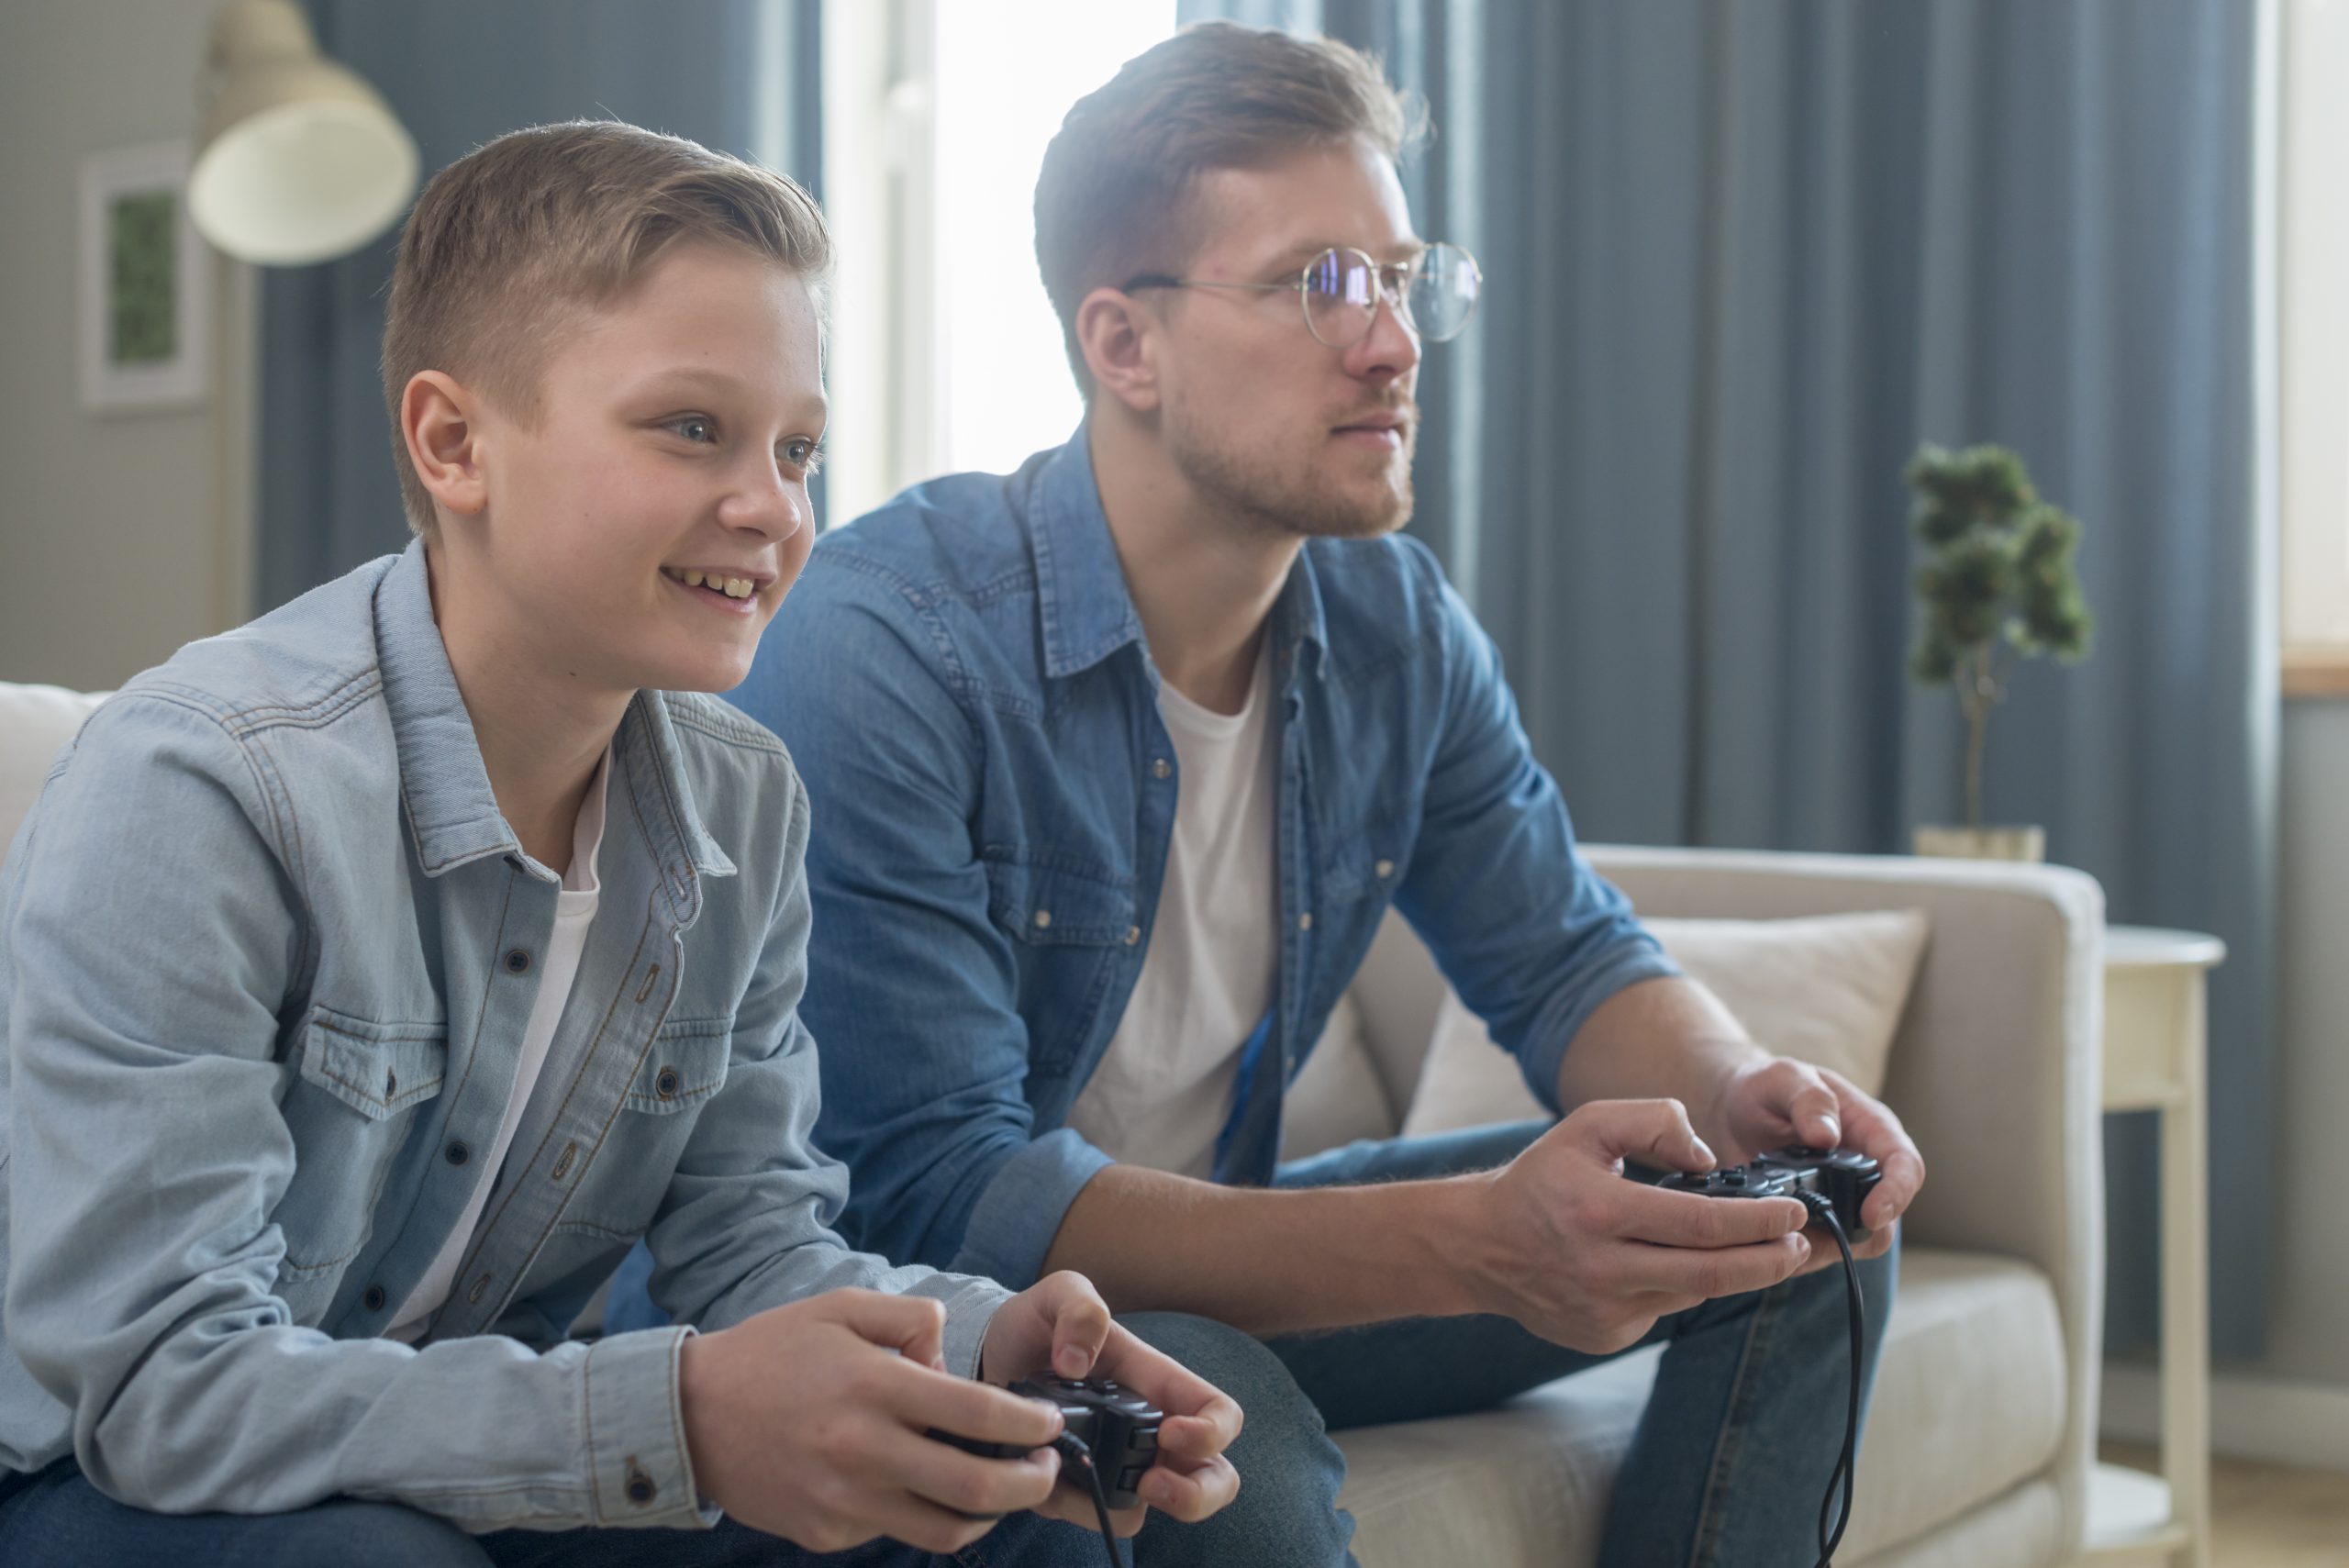 Smiling boy and focused man sitting on couch playing video games together in a living room. 